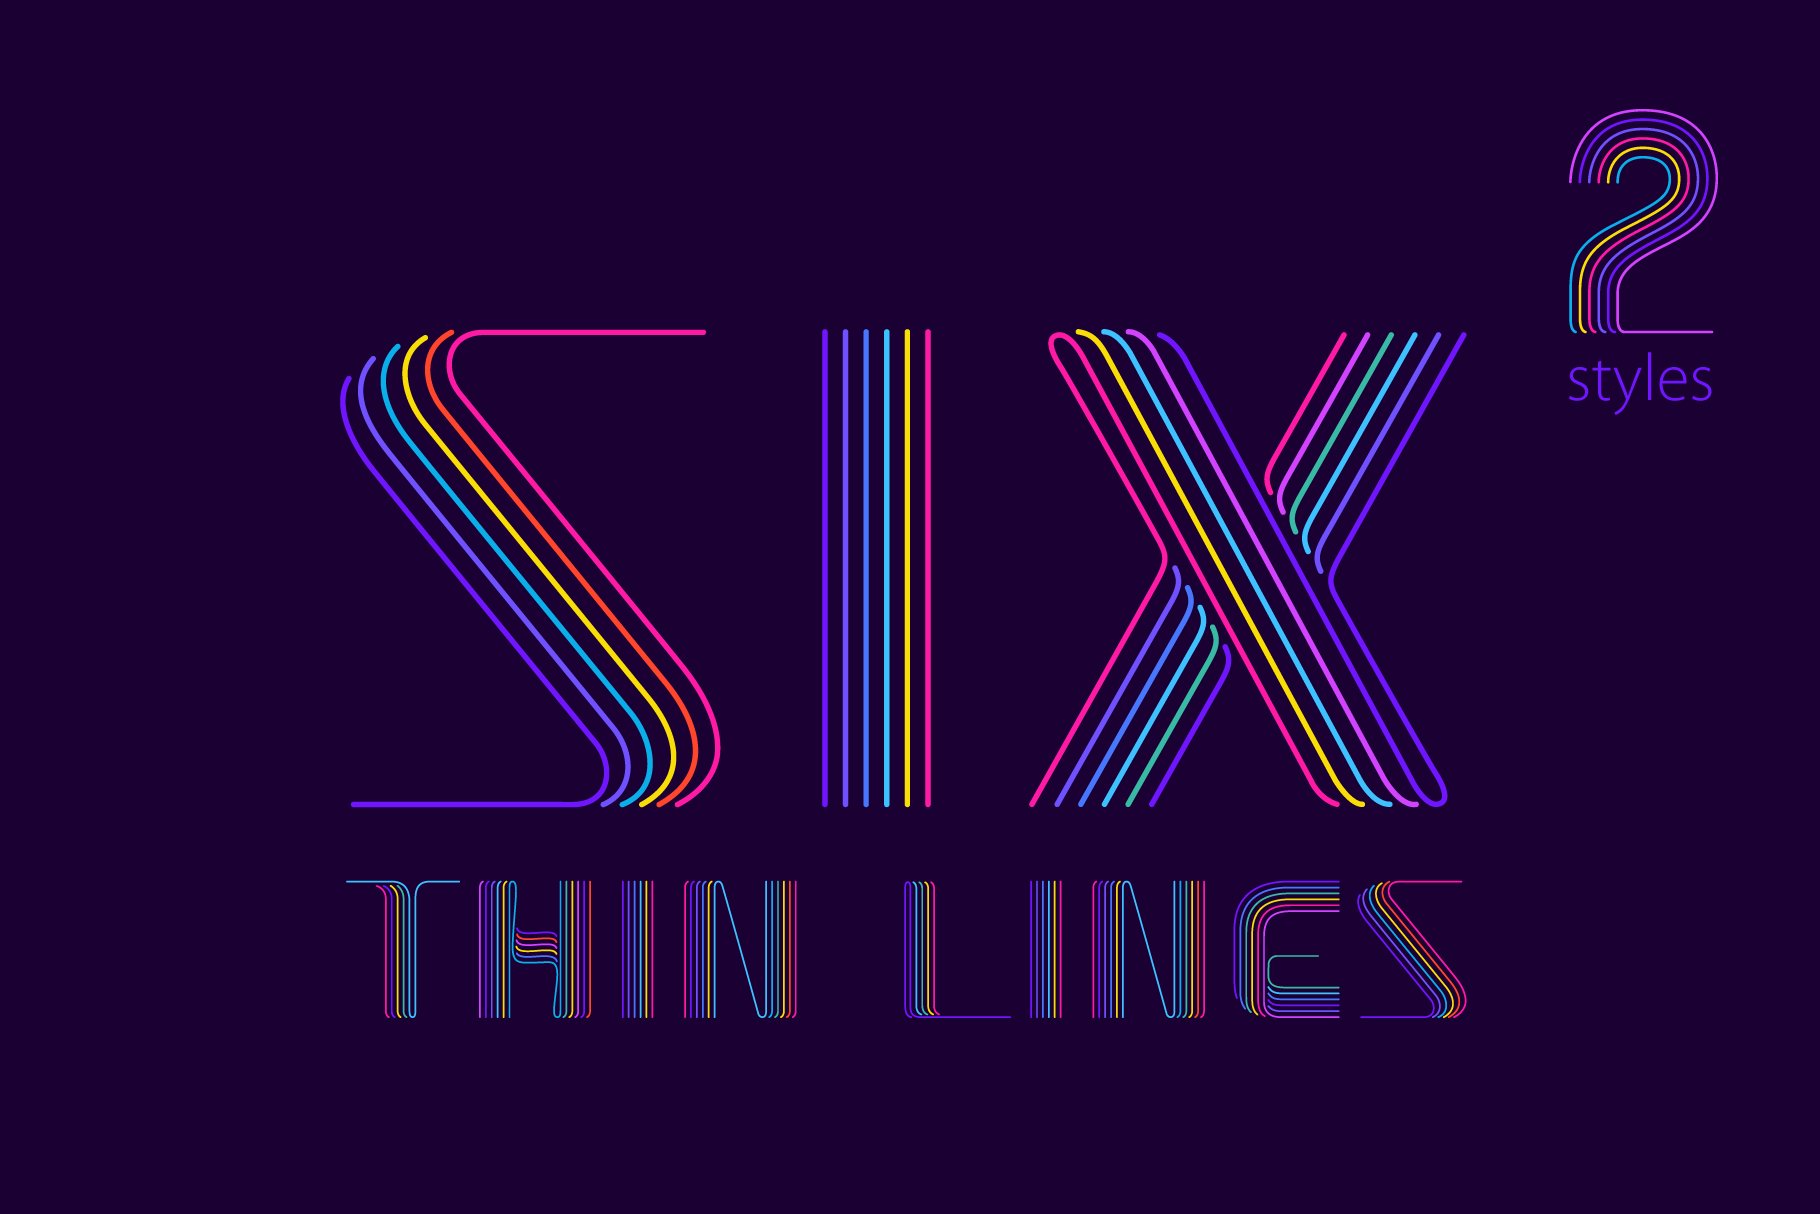 Six Thin Lines Colored font cover image.